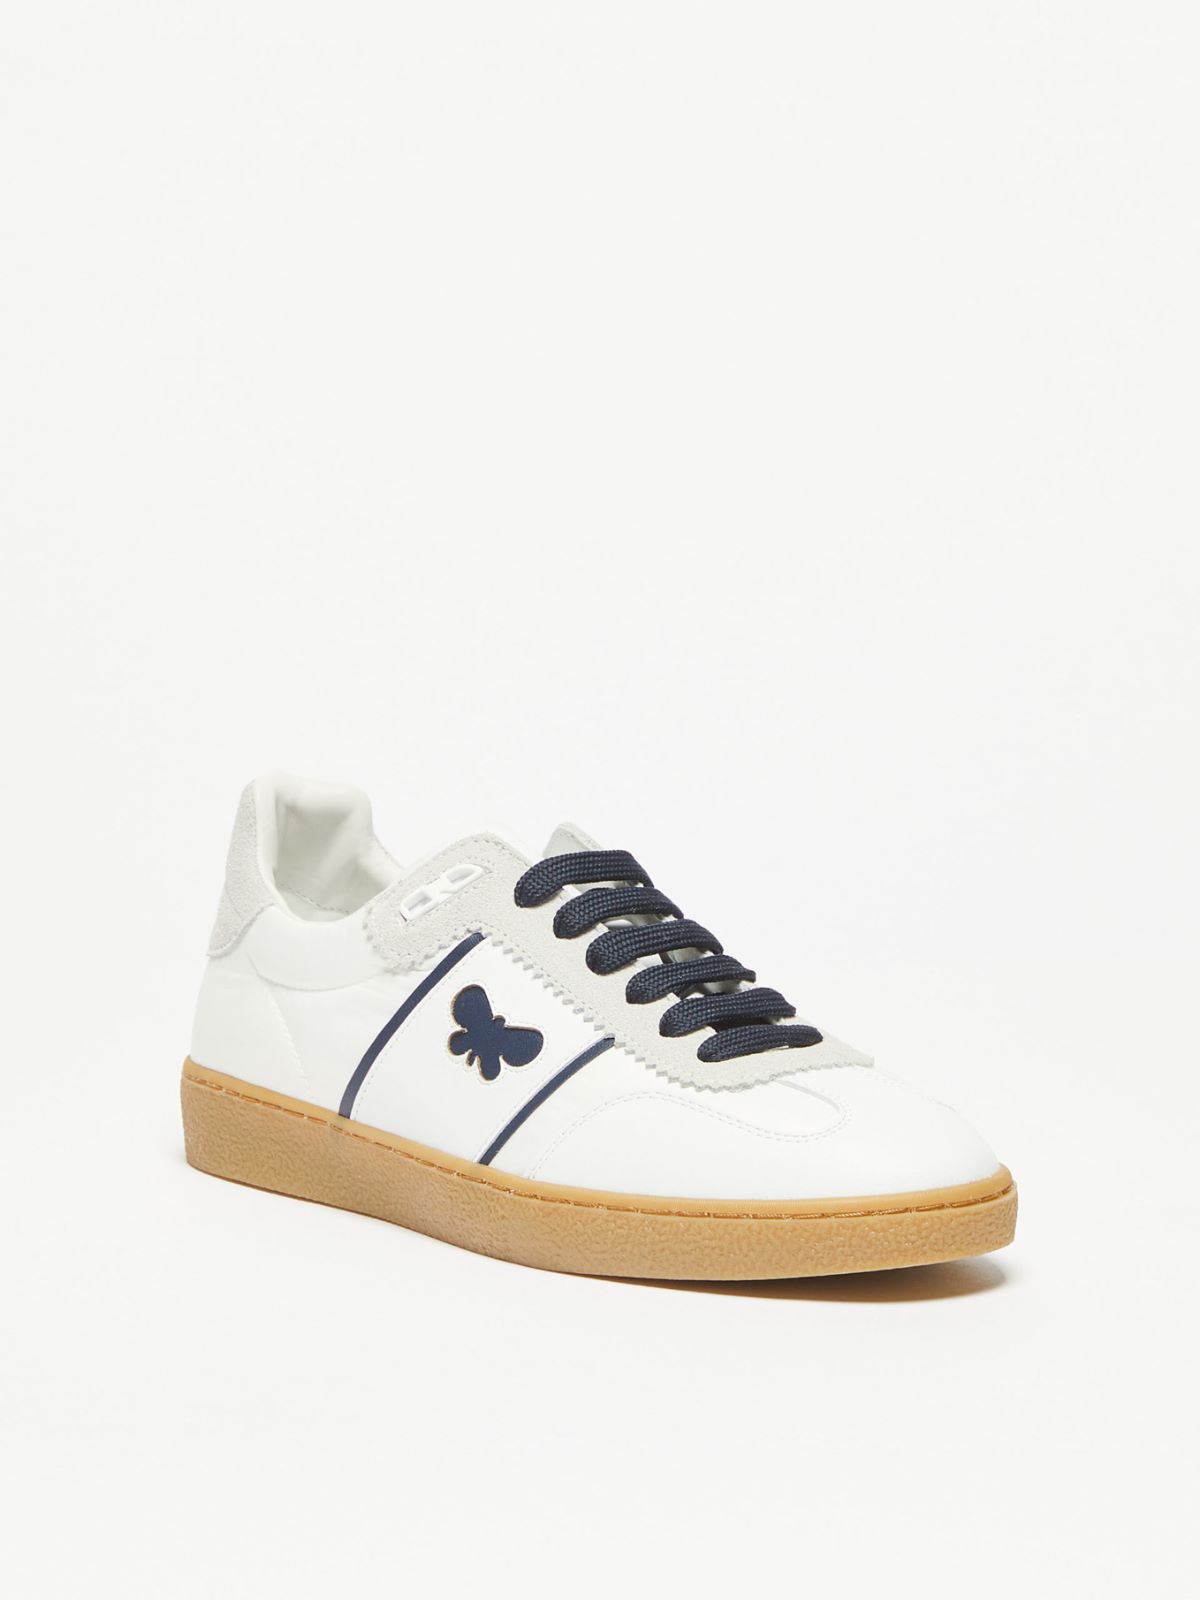 Trainers in technical fabric and leather - WHITE - Weekend Max Mara - 2